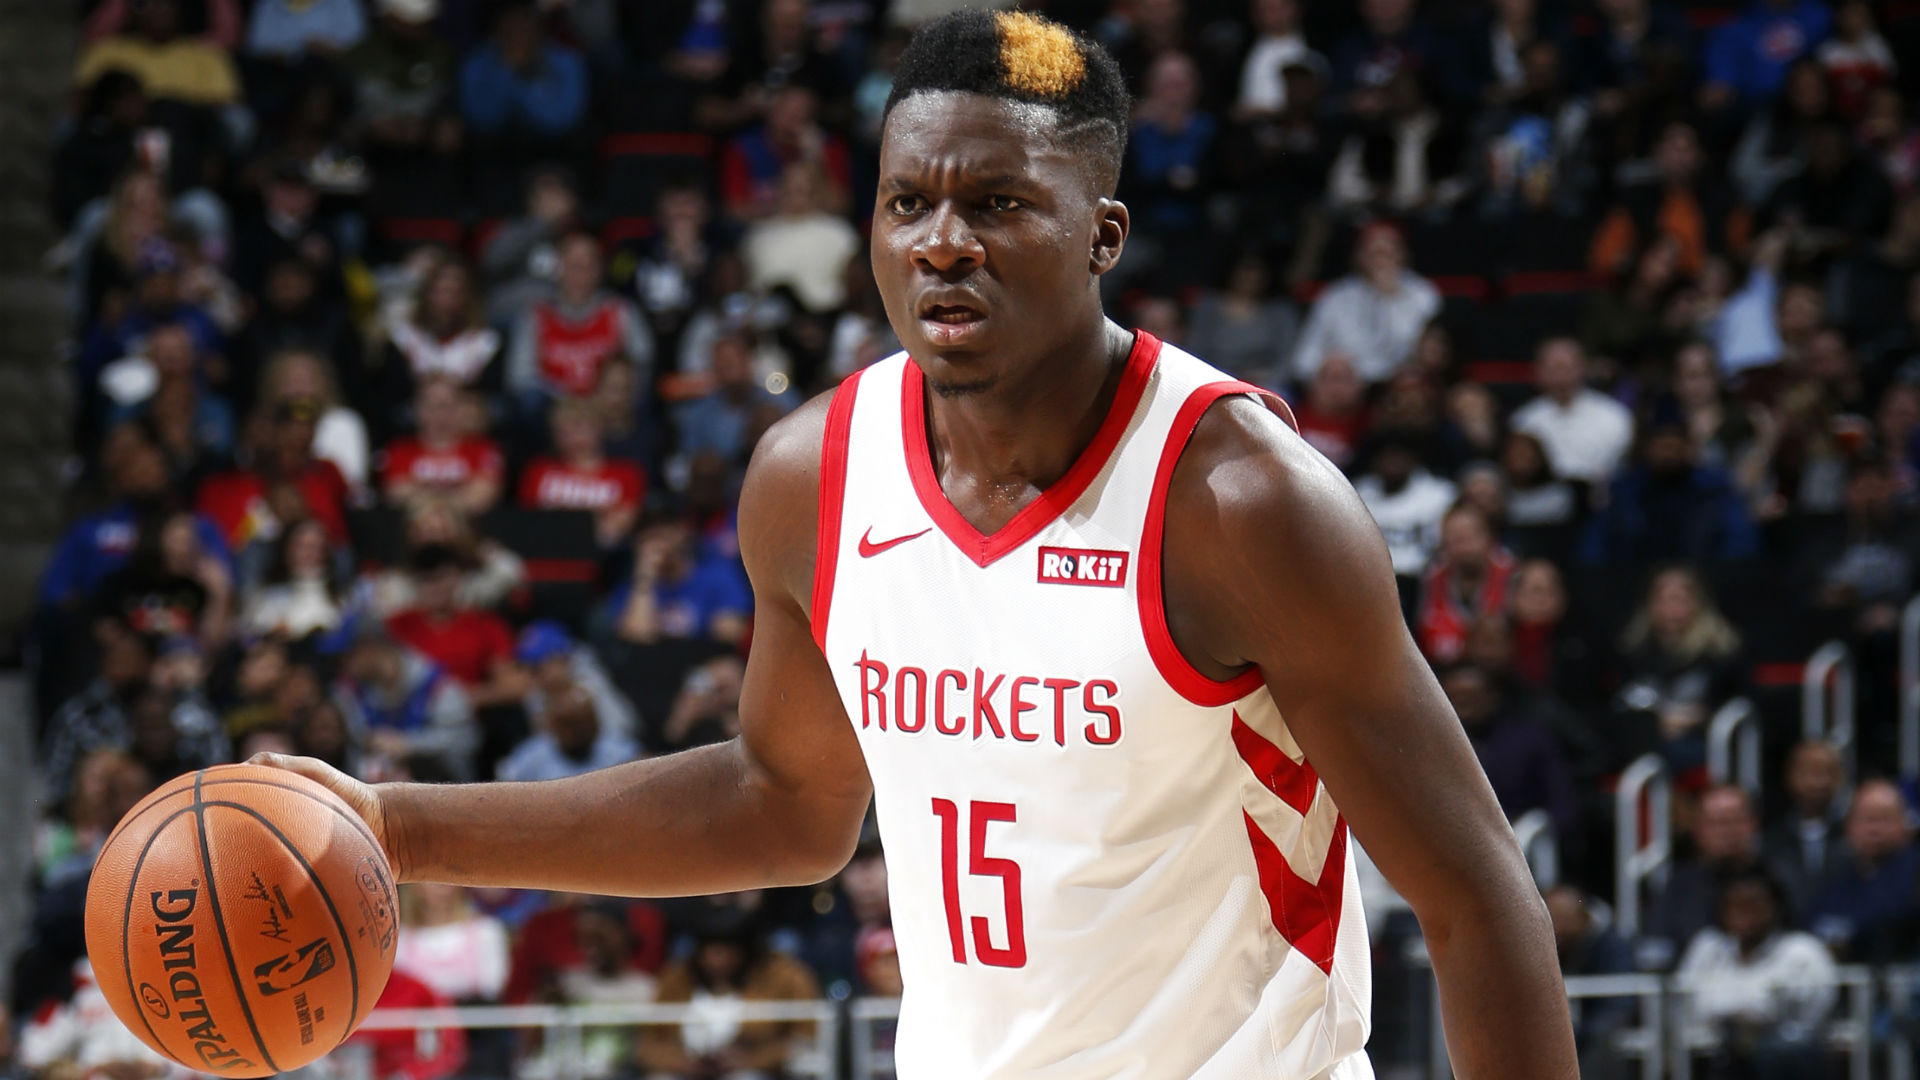 Report: Rockets centre Clint Capela to miss 4-6 weeks with thumb injury | NBA.com ...